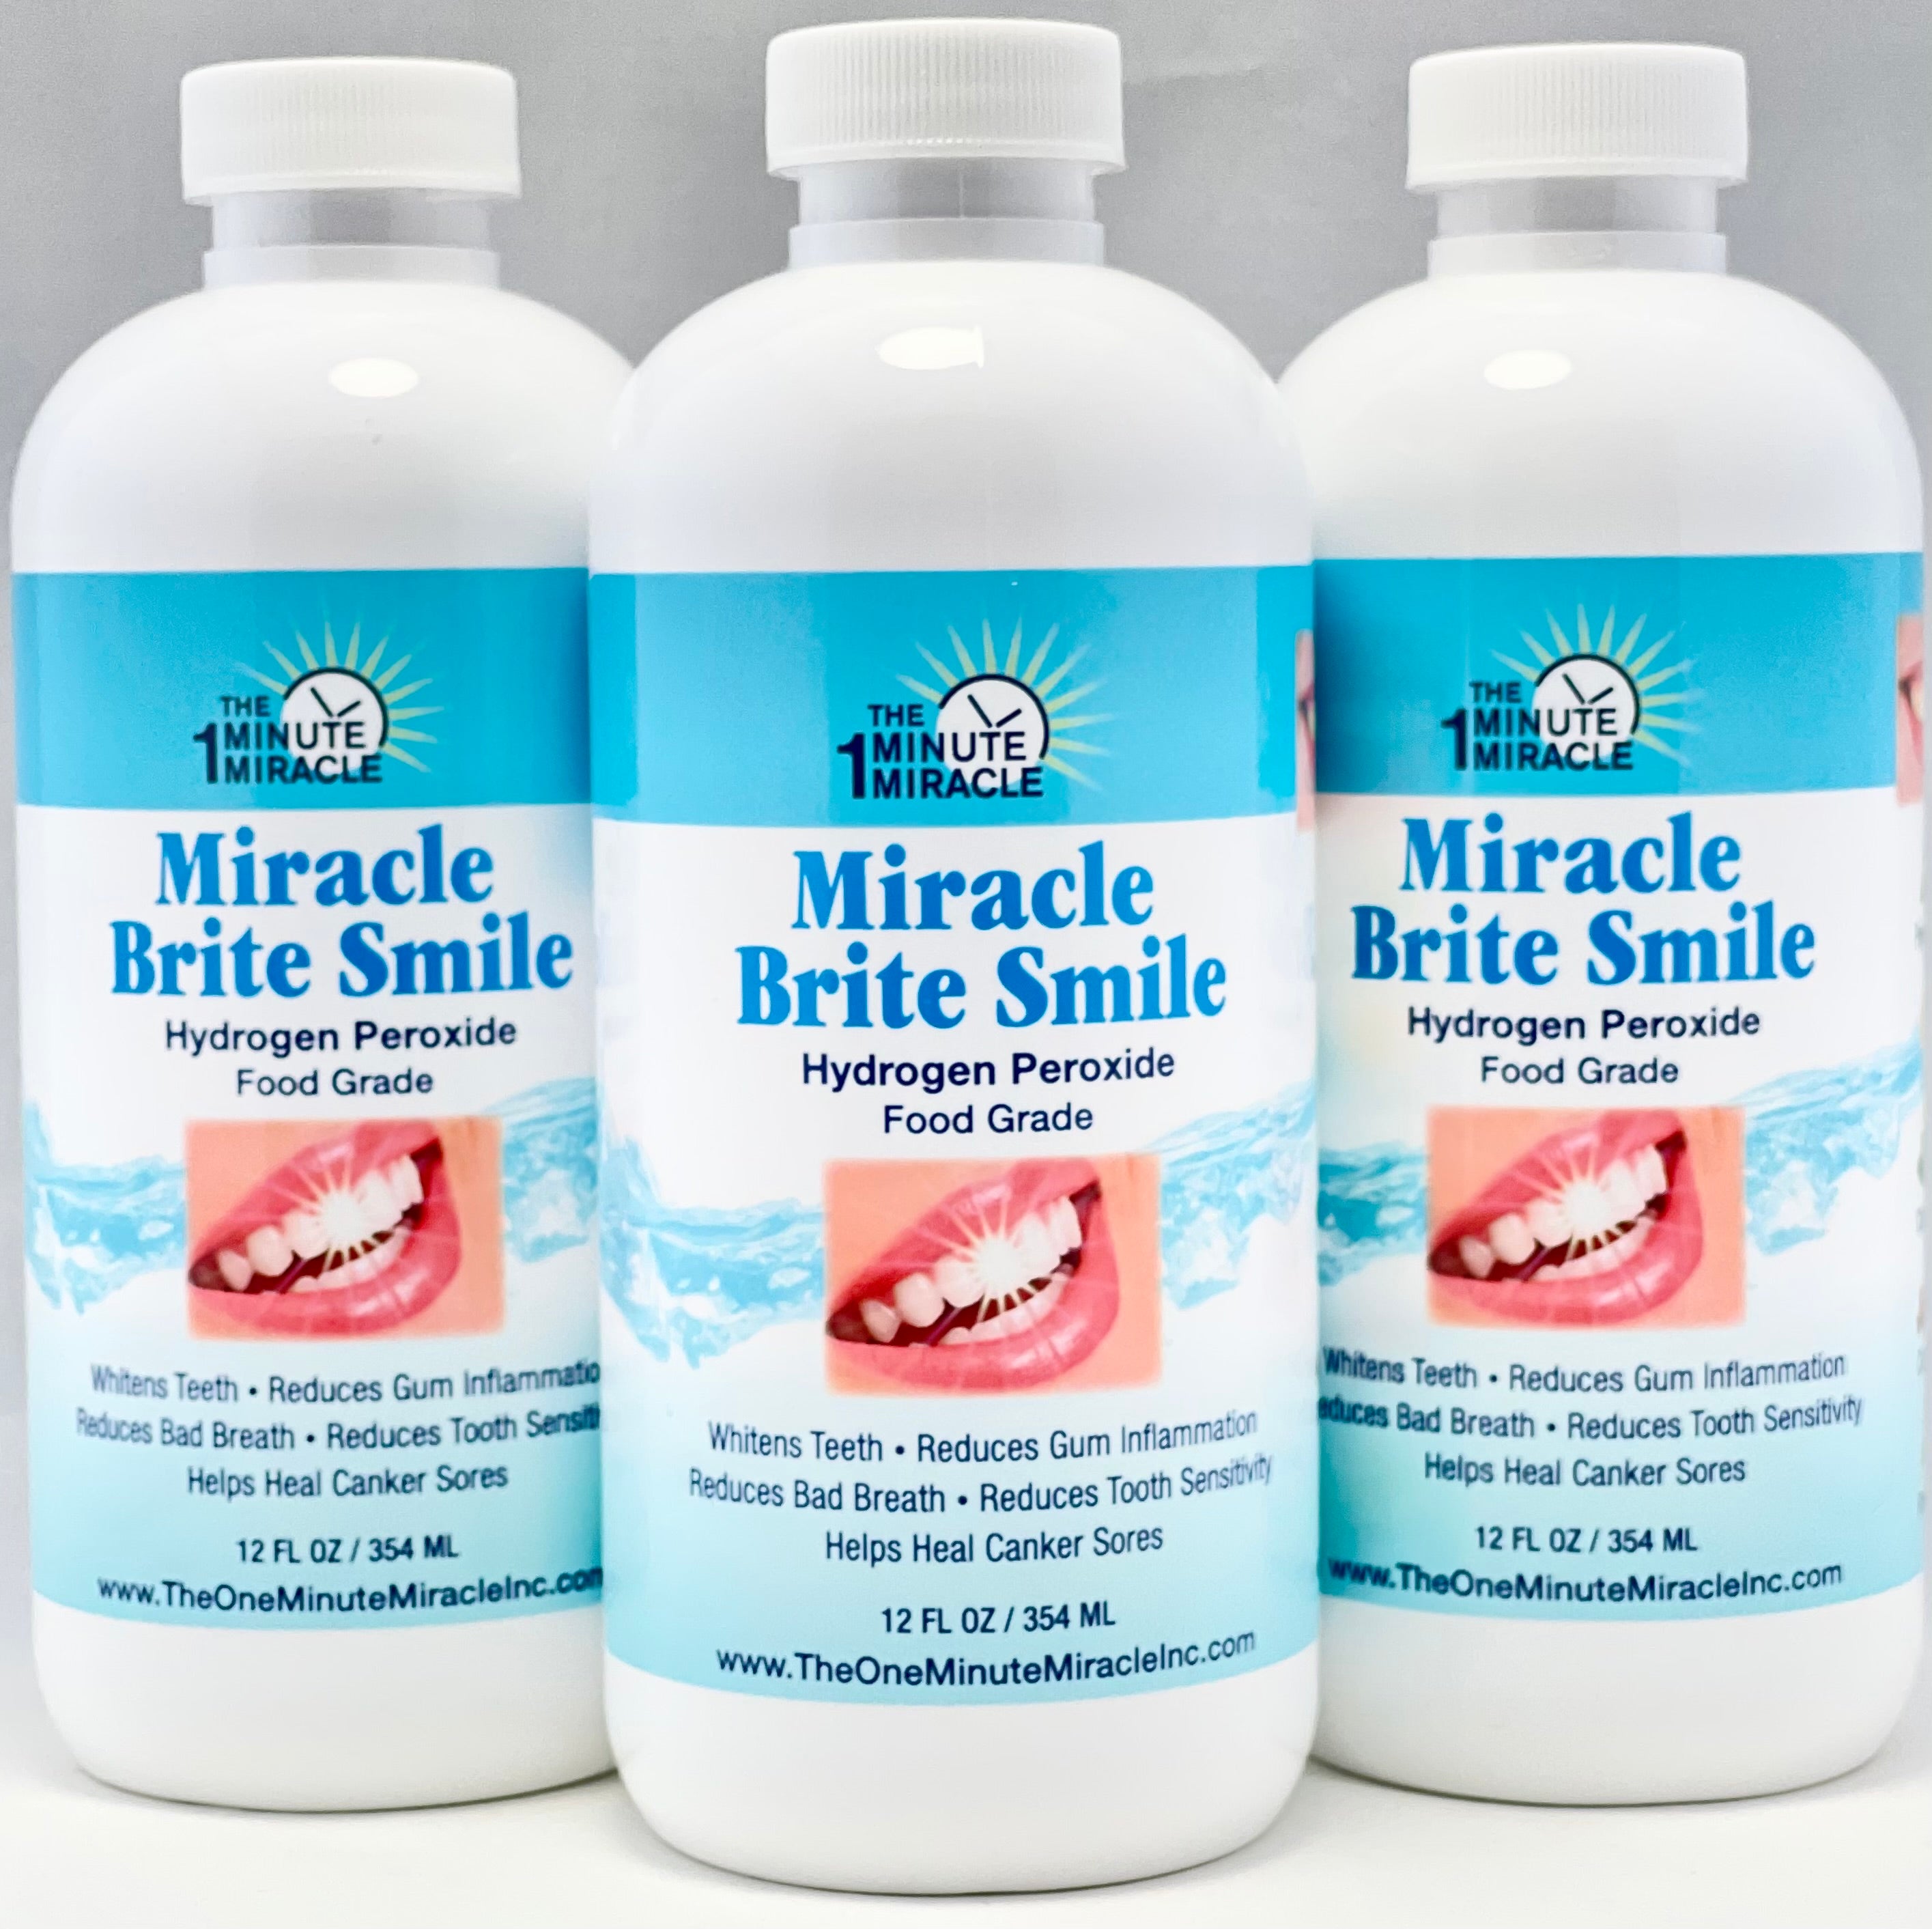 Miracle Brite Smile - Essential Oxygen Organic Rinse Mouthwash for Whiter Teeth, Fresher Breath, and Healthier Gums, Peppermint - 3 Bottle 12 fl. oz